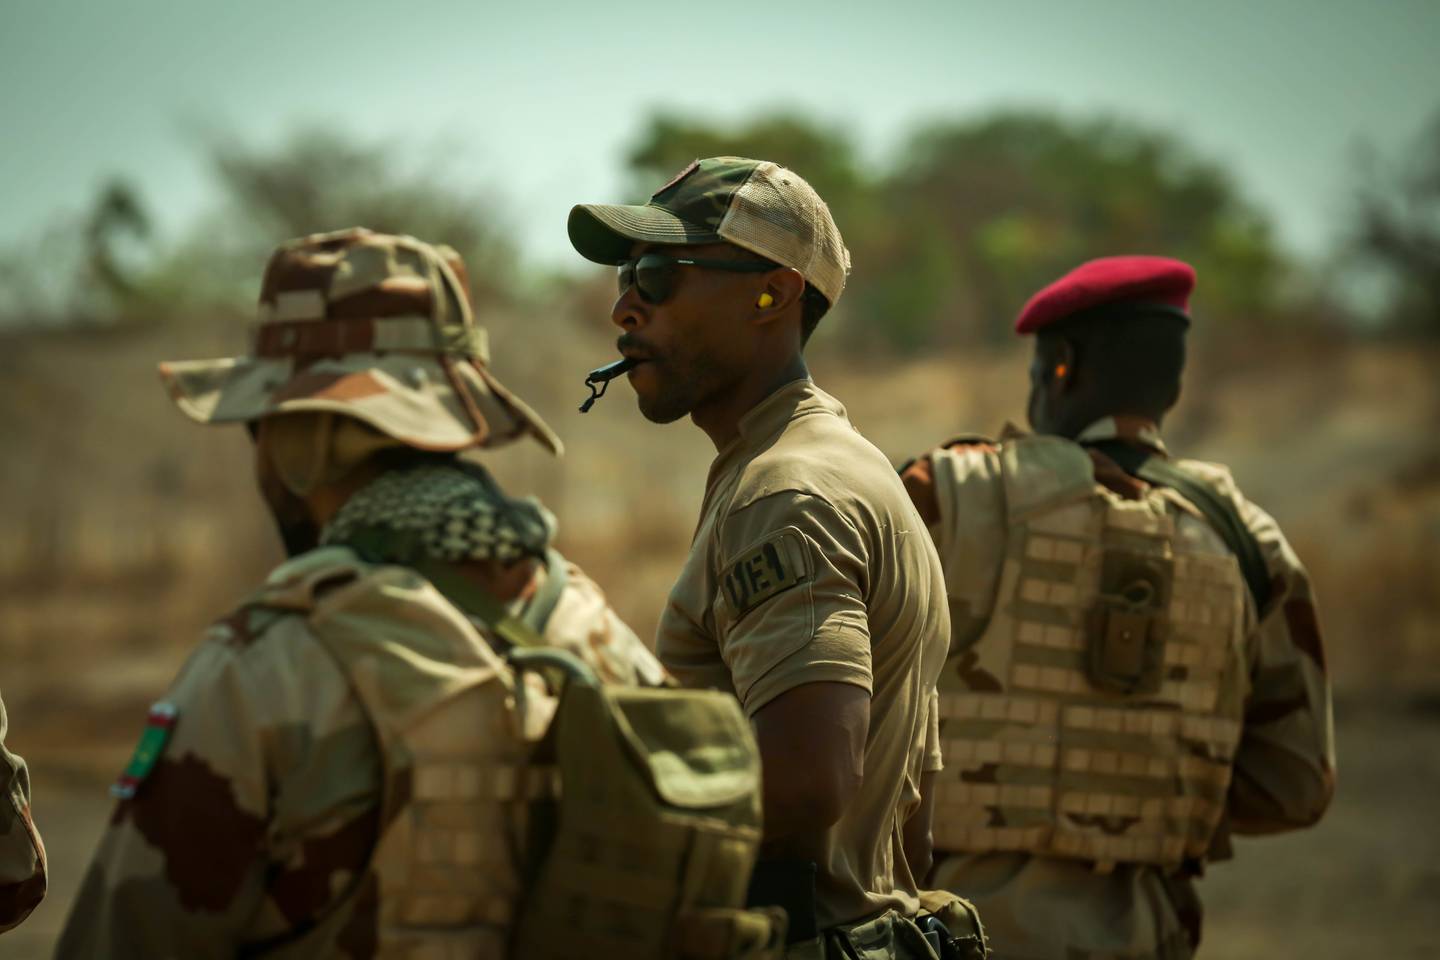 U.S. Army soldier blows a whistle to halt Mauritanian soldiers during dynamic shooting drills at Flintlock in Daboya, Ghana, March 9, 2023.